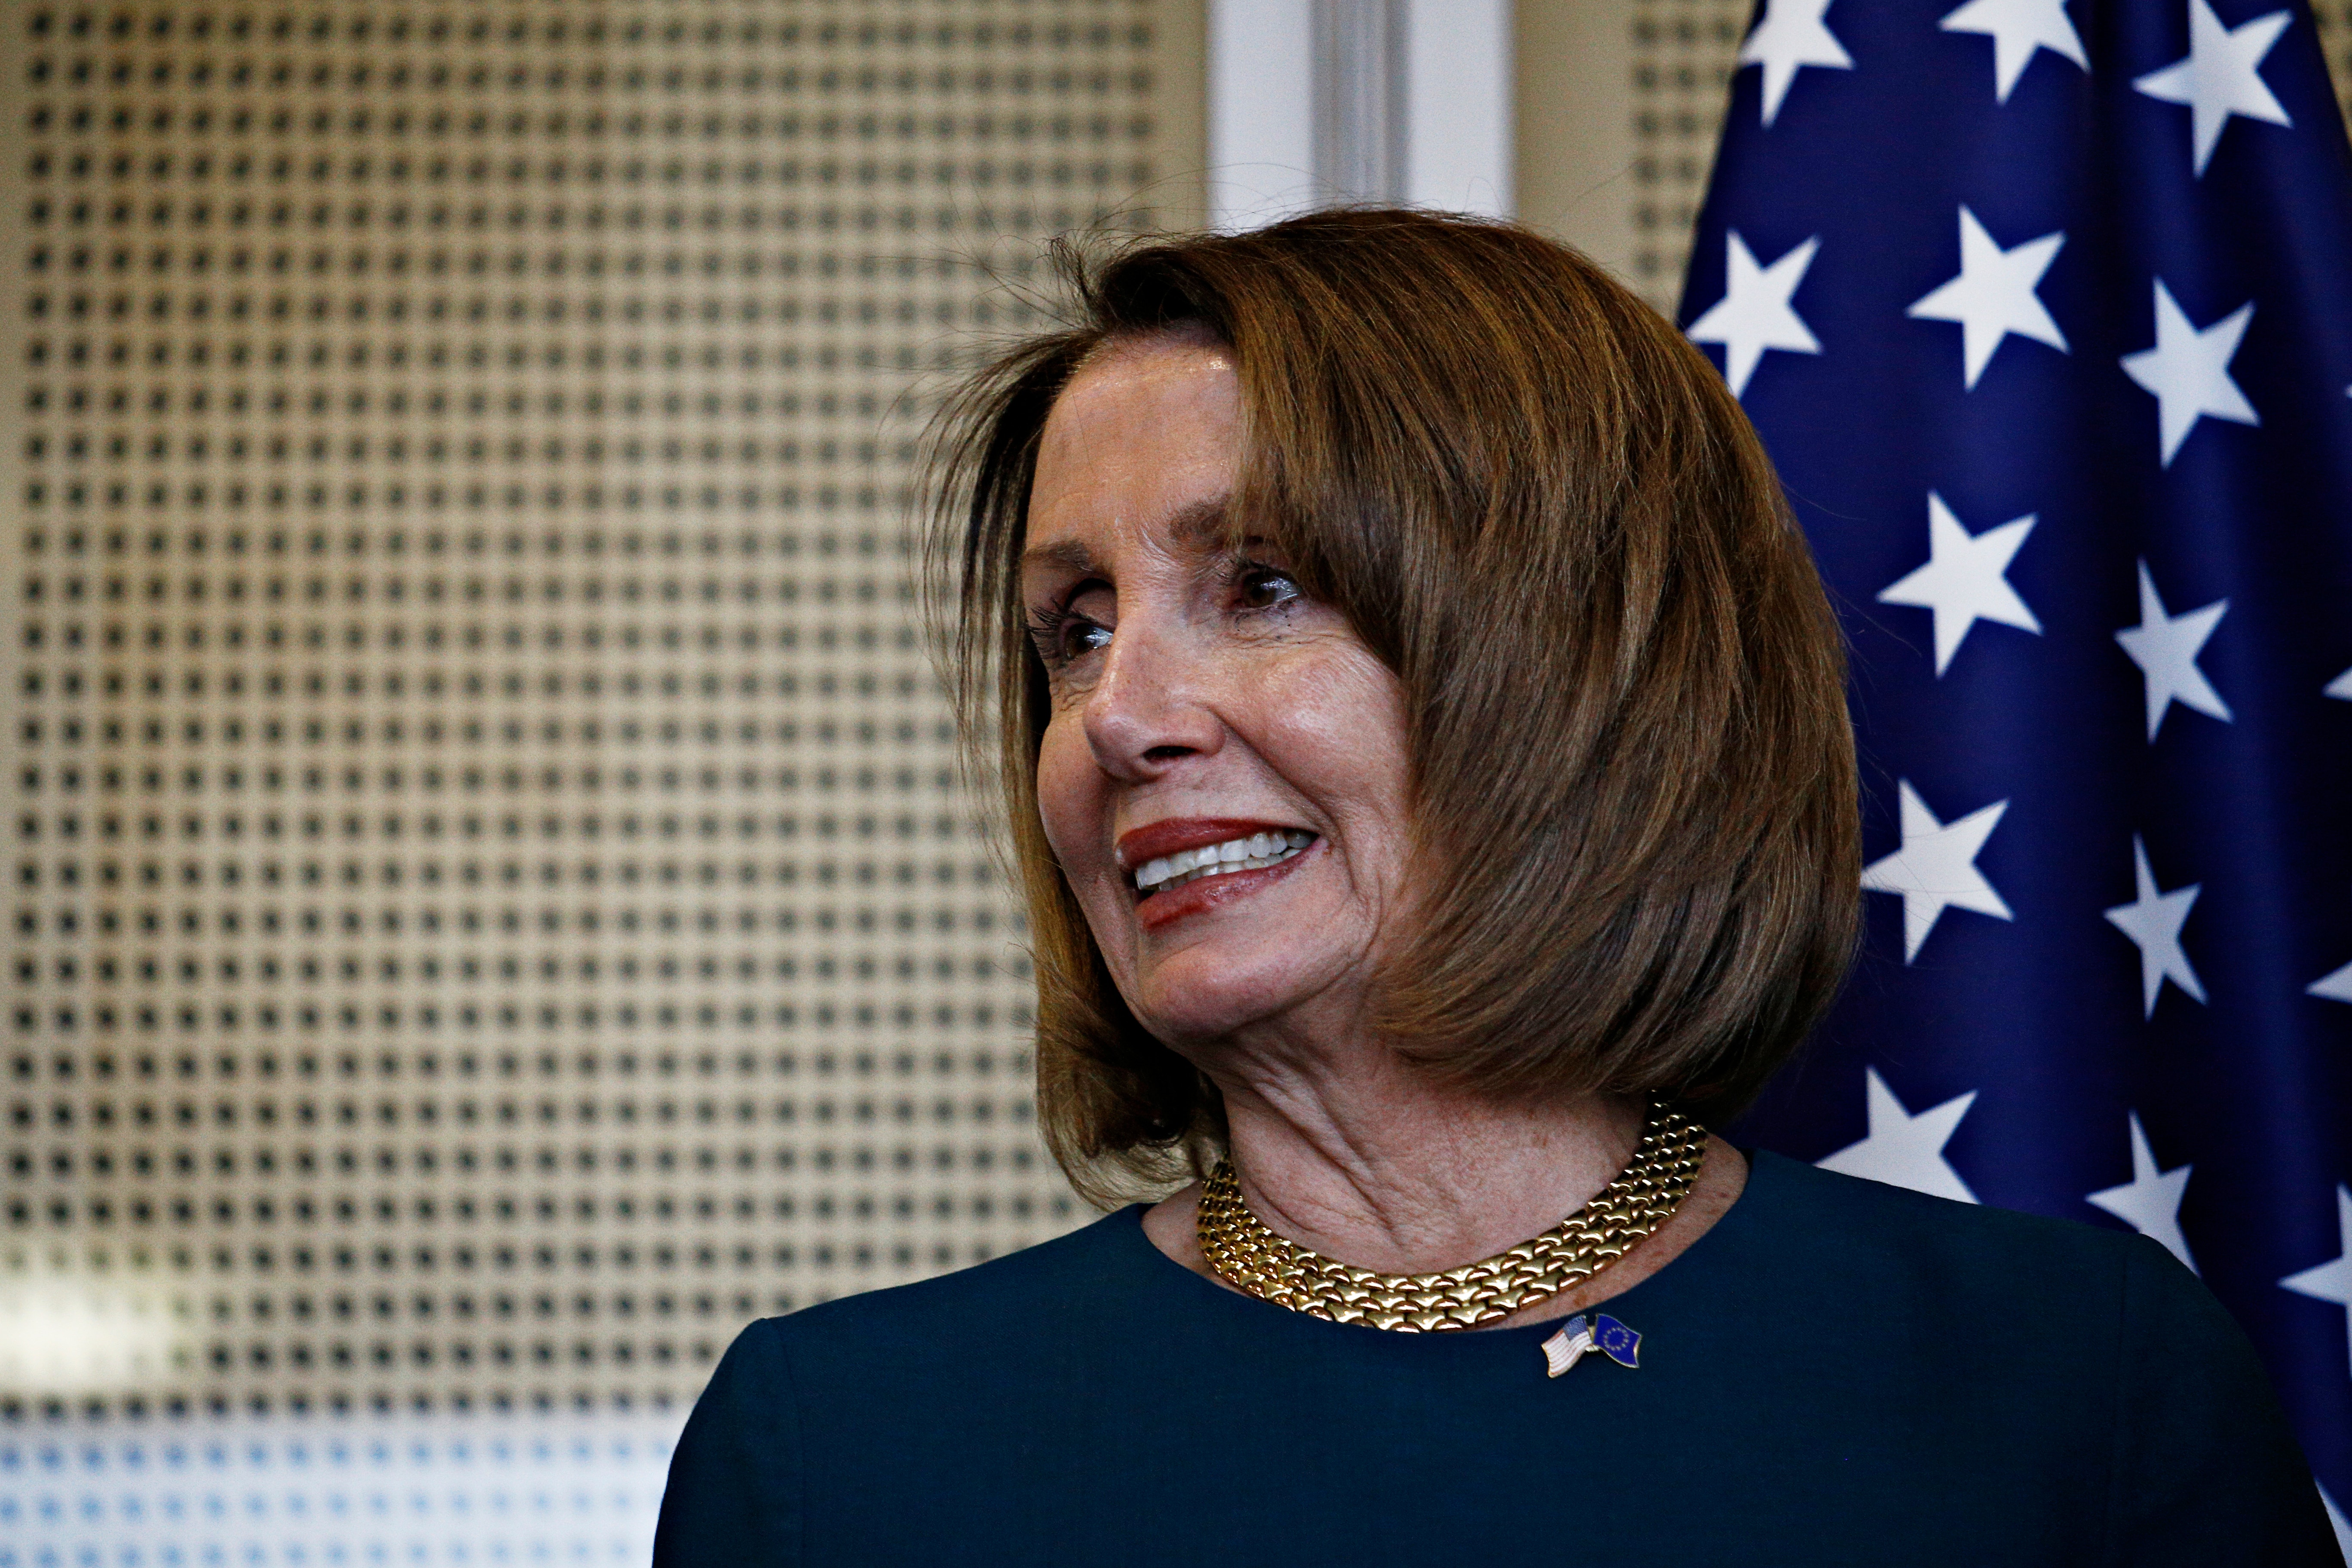 Nancy Pelosi Just Lost More Than Her Annual Salary With This Stock Trade